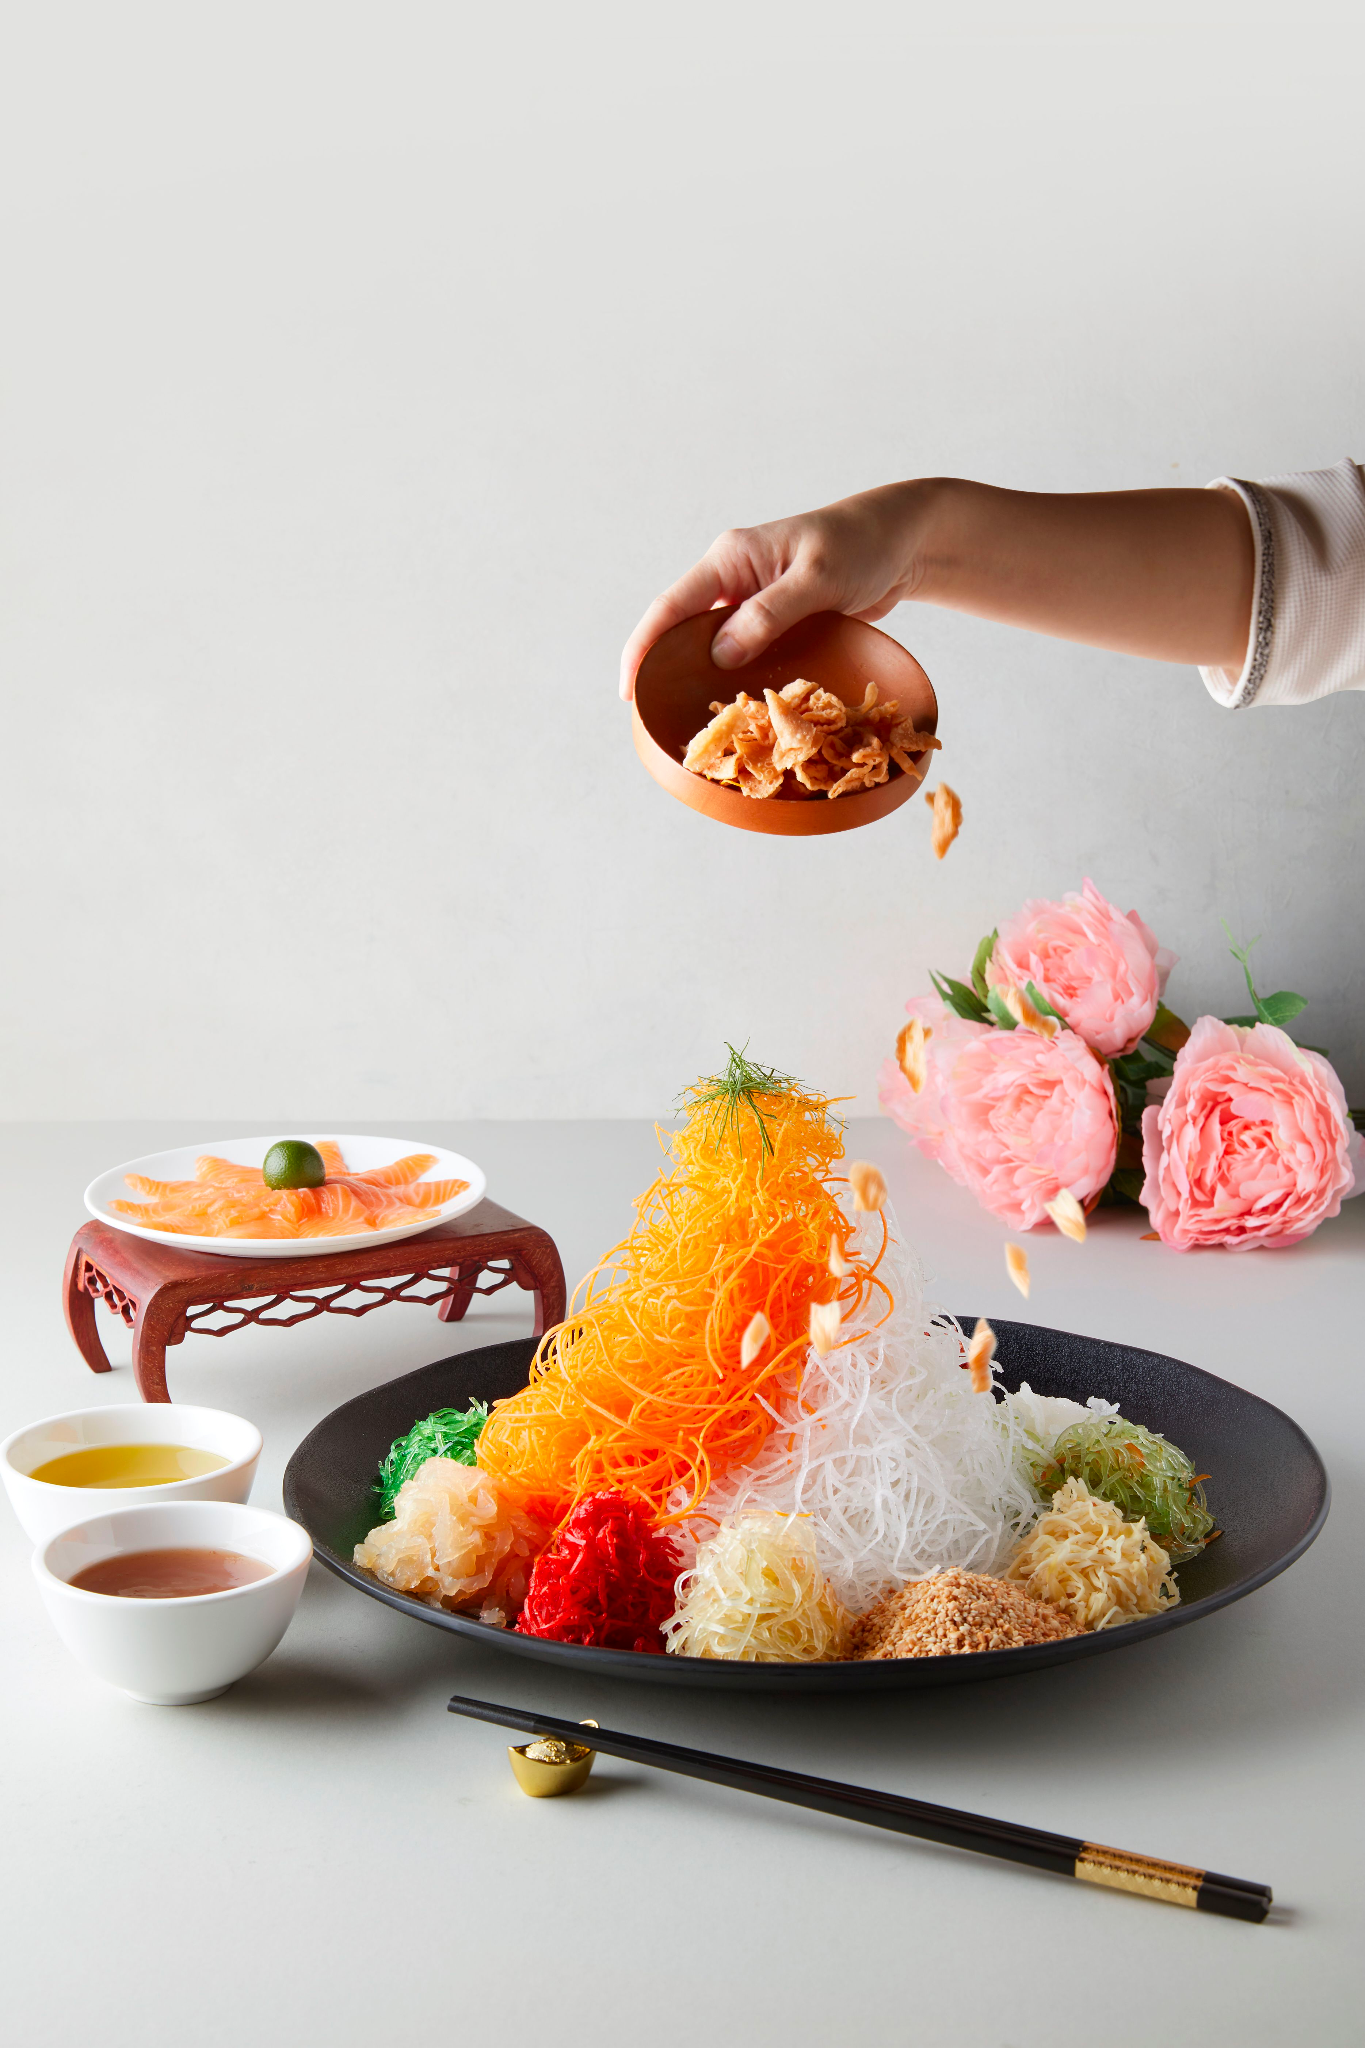 Lobang: MORE THAN 50 CNY 2023 F&B Deals - Your one stop guide to Yusheng, Pen Cai, Set Menus and more this Lunar New Year! - 21